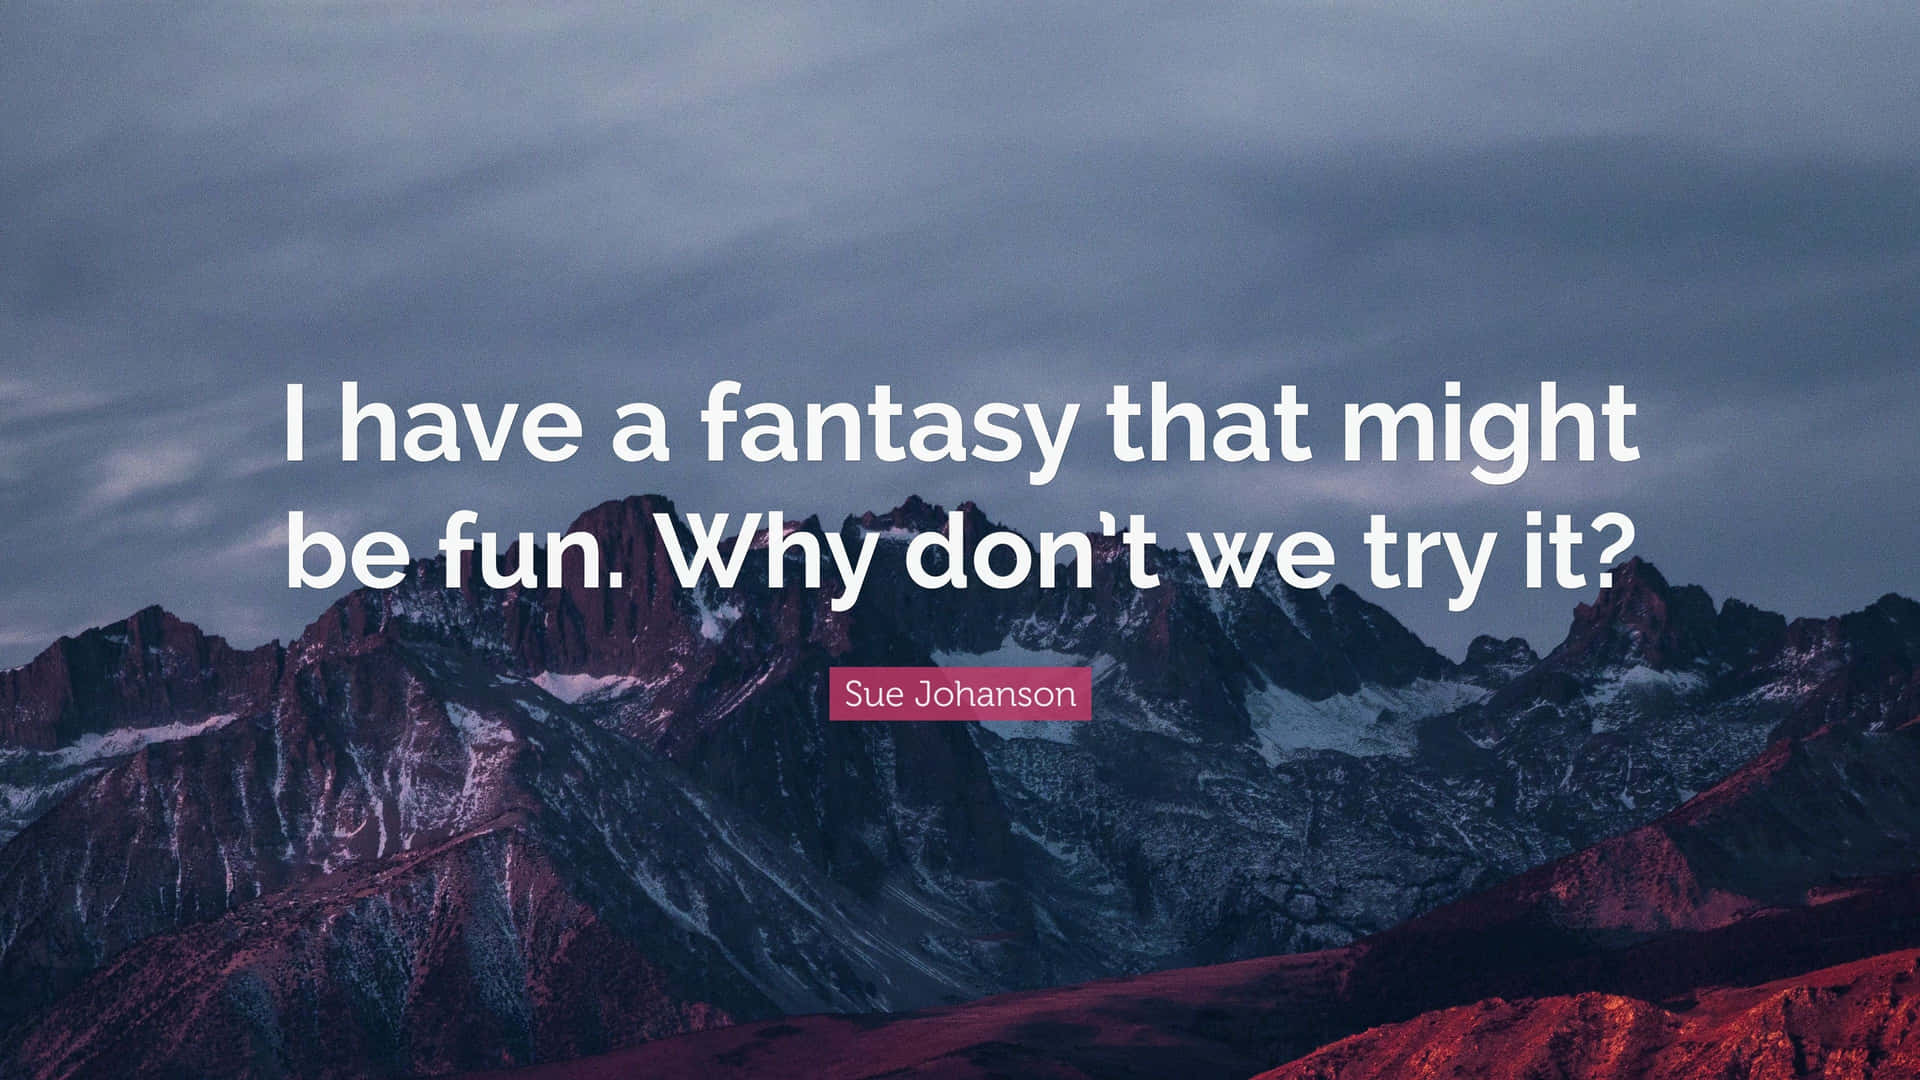 I Have A Fantasy That Might Be Fun Why Don't We Try? Wallpaper